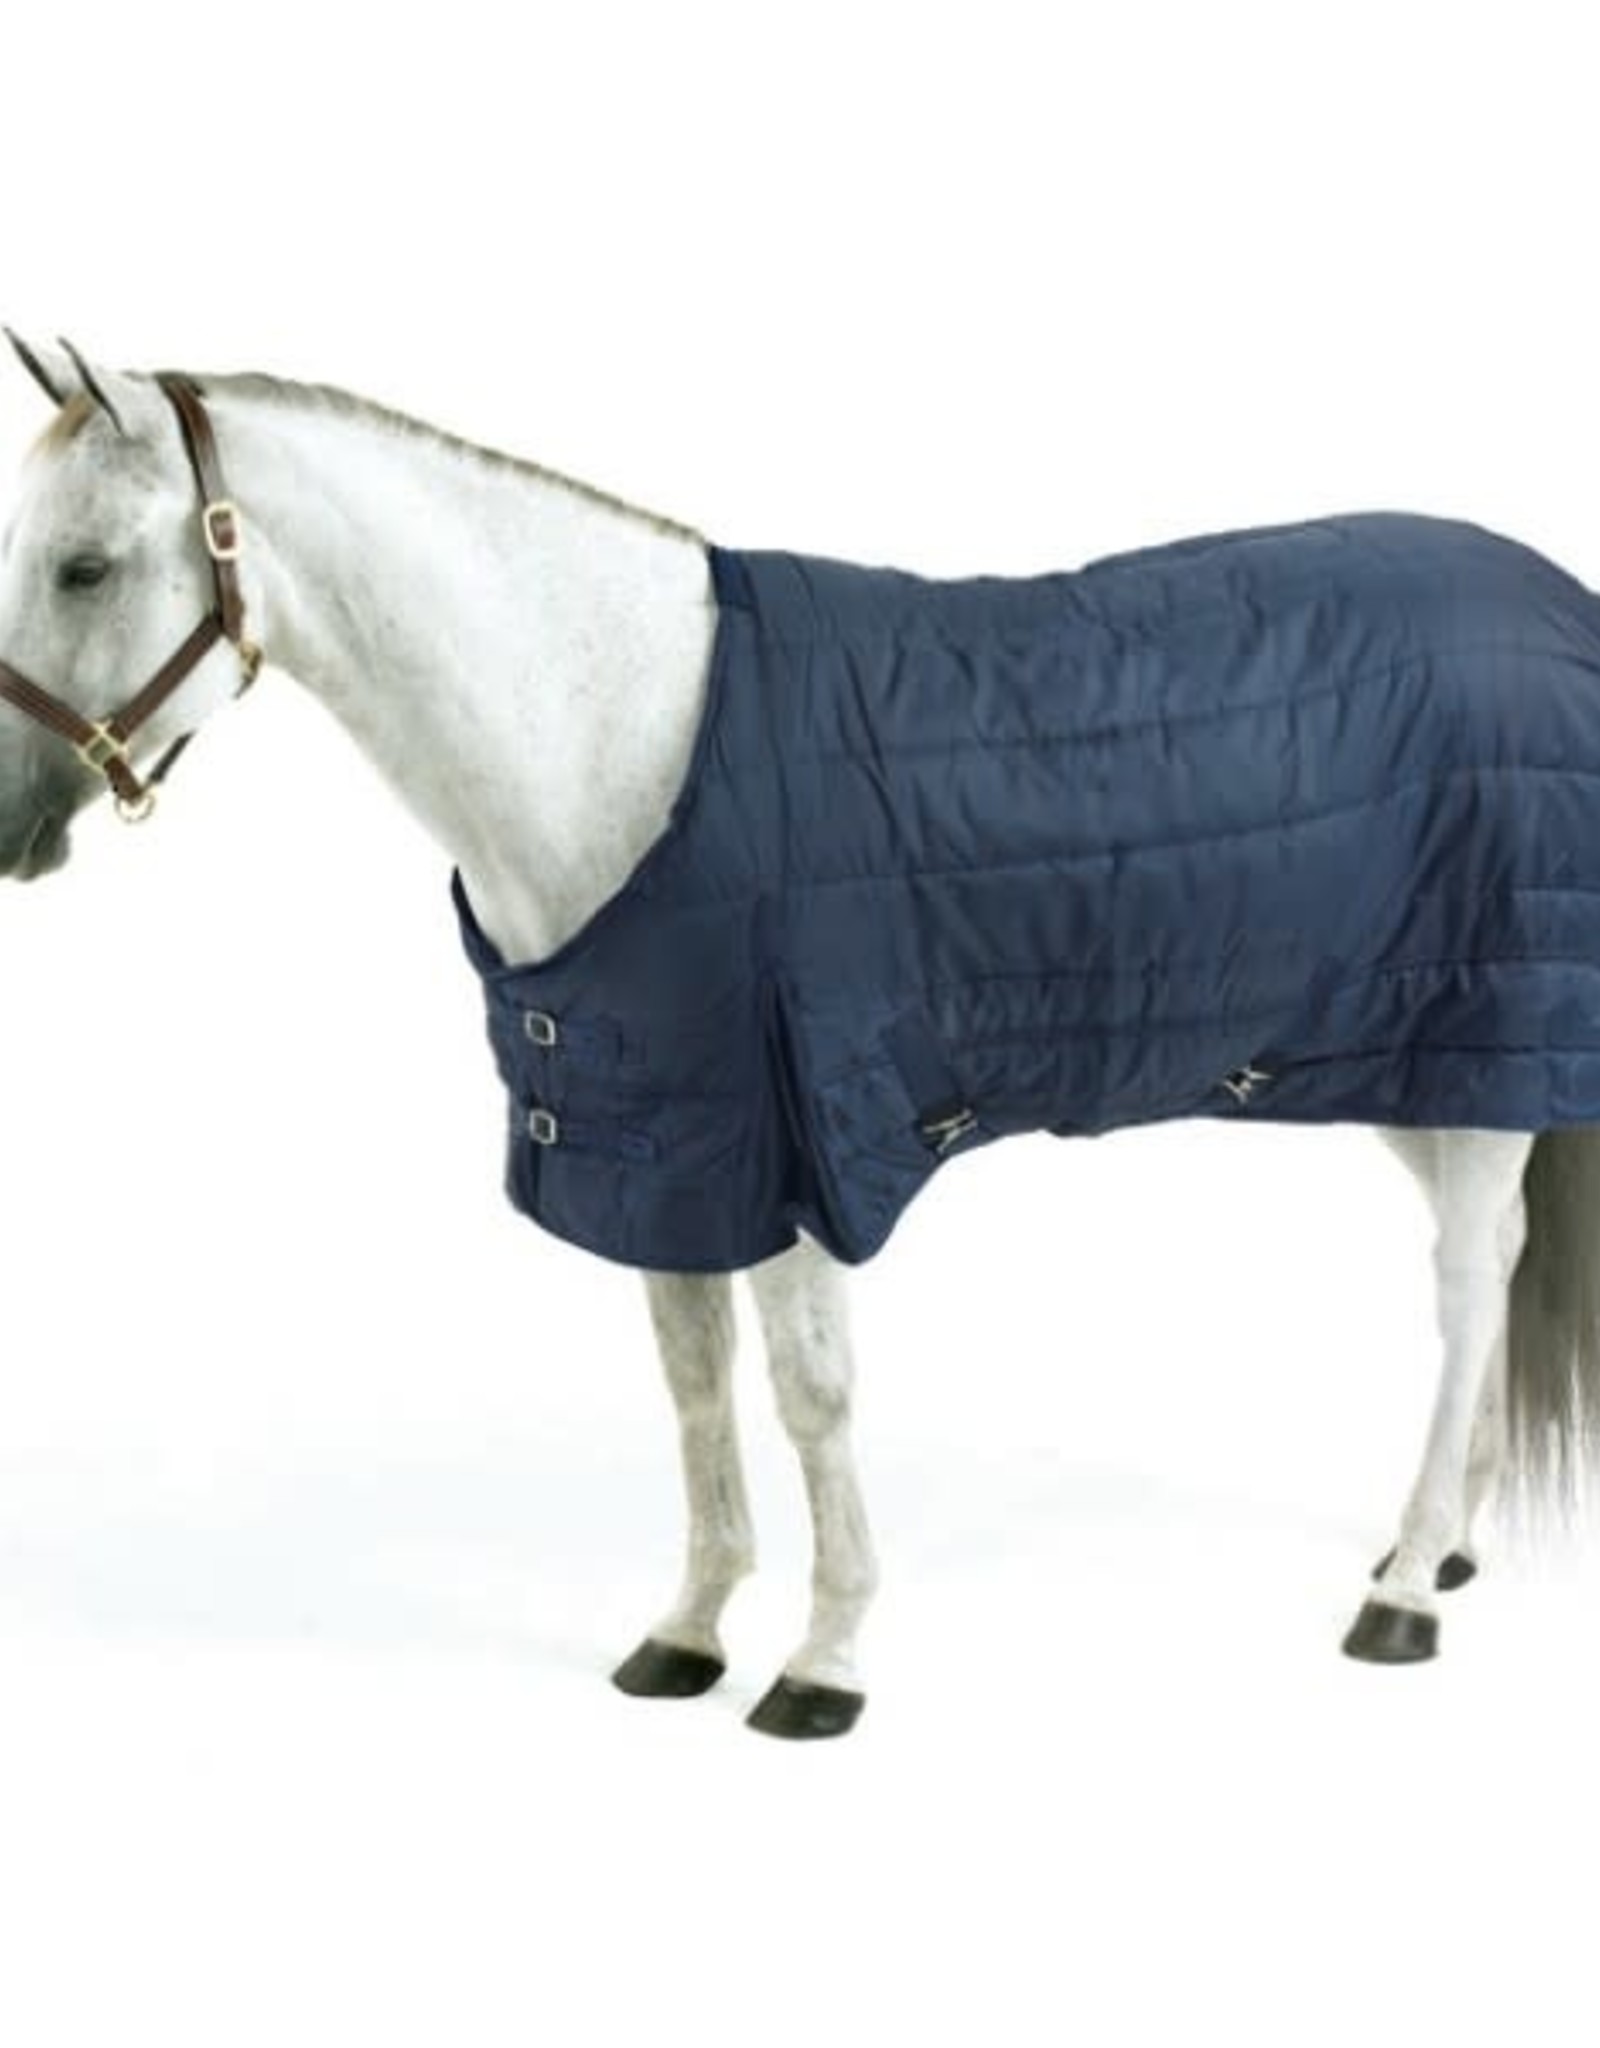 EQ 420D STABLE BLANKET 300G